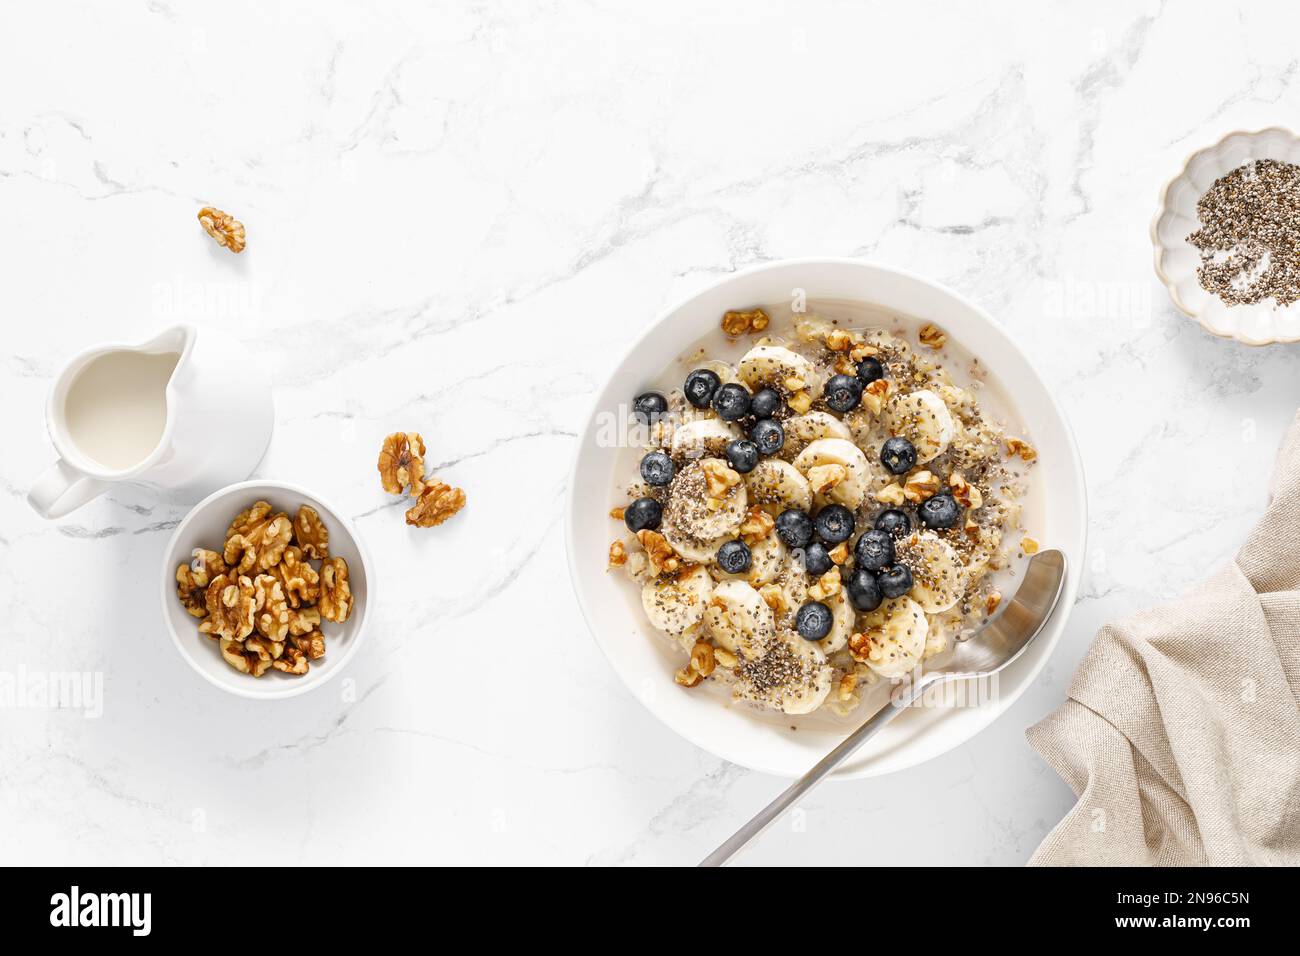 Oatmeal bowl. Oat porridge with banana, blueberry, walnut, chia seeds and oat milk for healthy breakfast. Healthy diet food. Top view Stock Photo